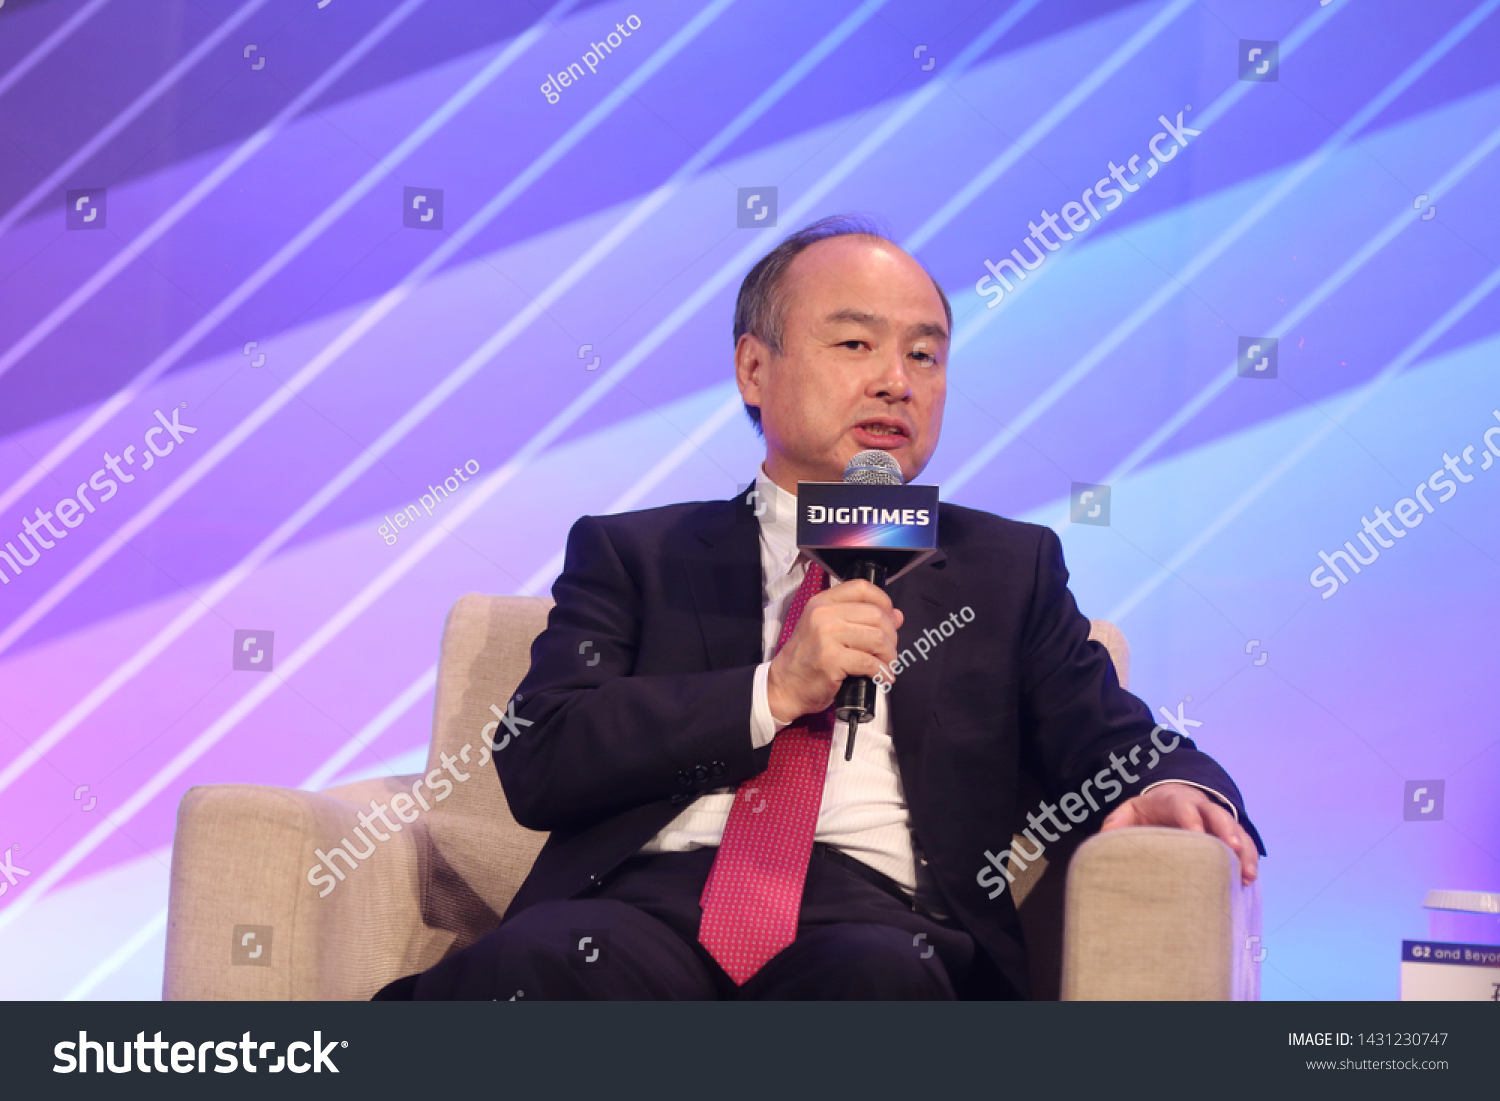 Taipei city, Taiwan - Jun 22, 2019:Masayoshi Son,Japanese business magnate and investor who is the founder and current chief executive officer of Japanese holding conglomerate SoftBank .